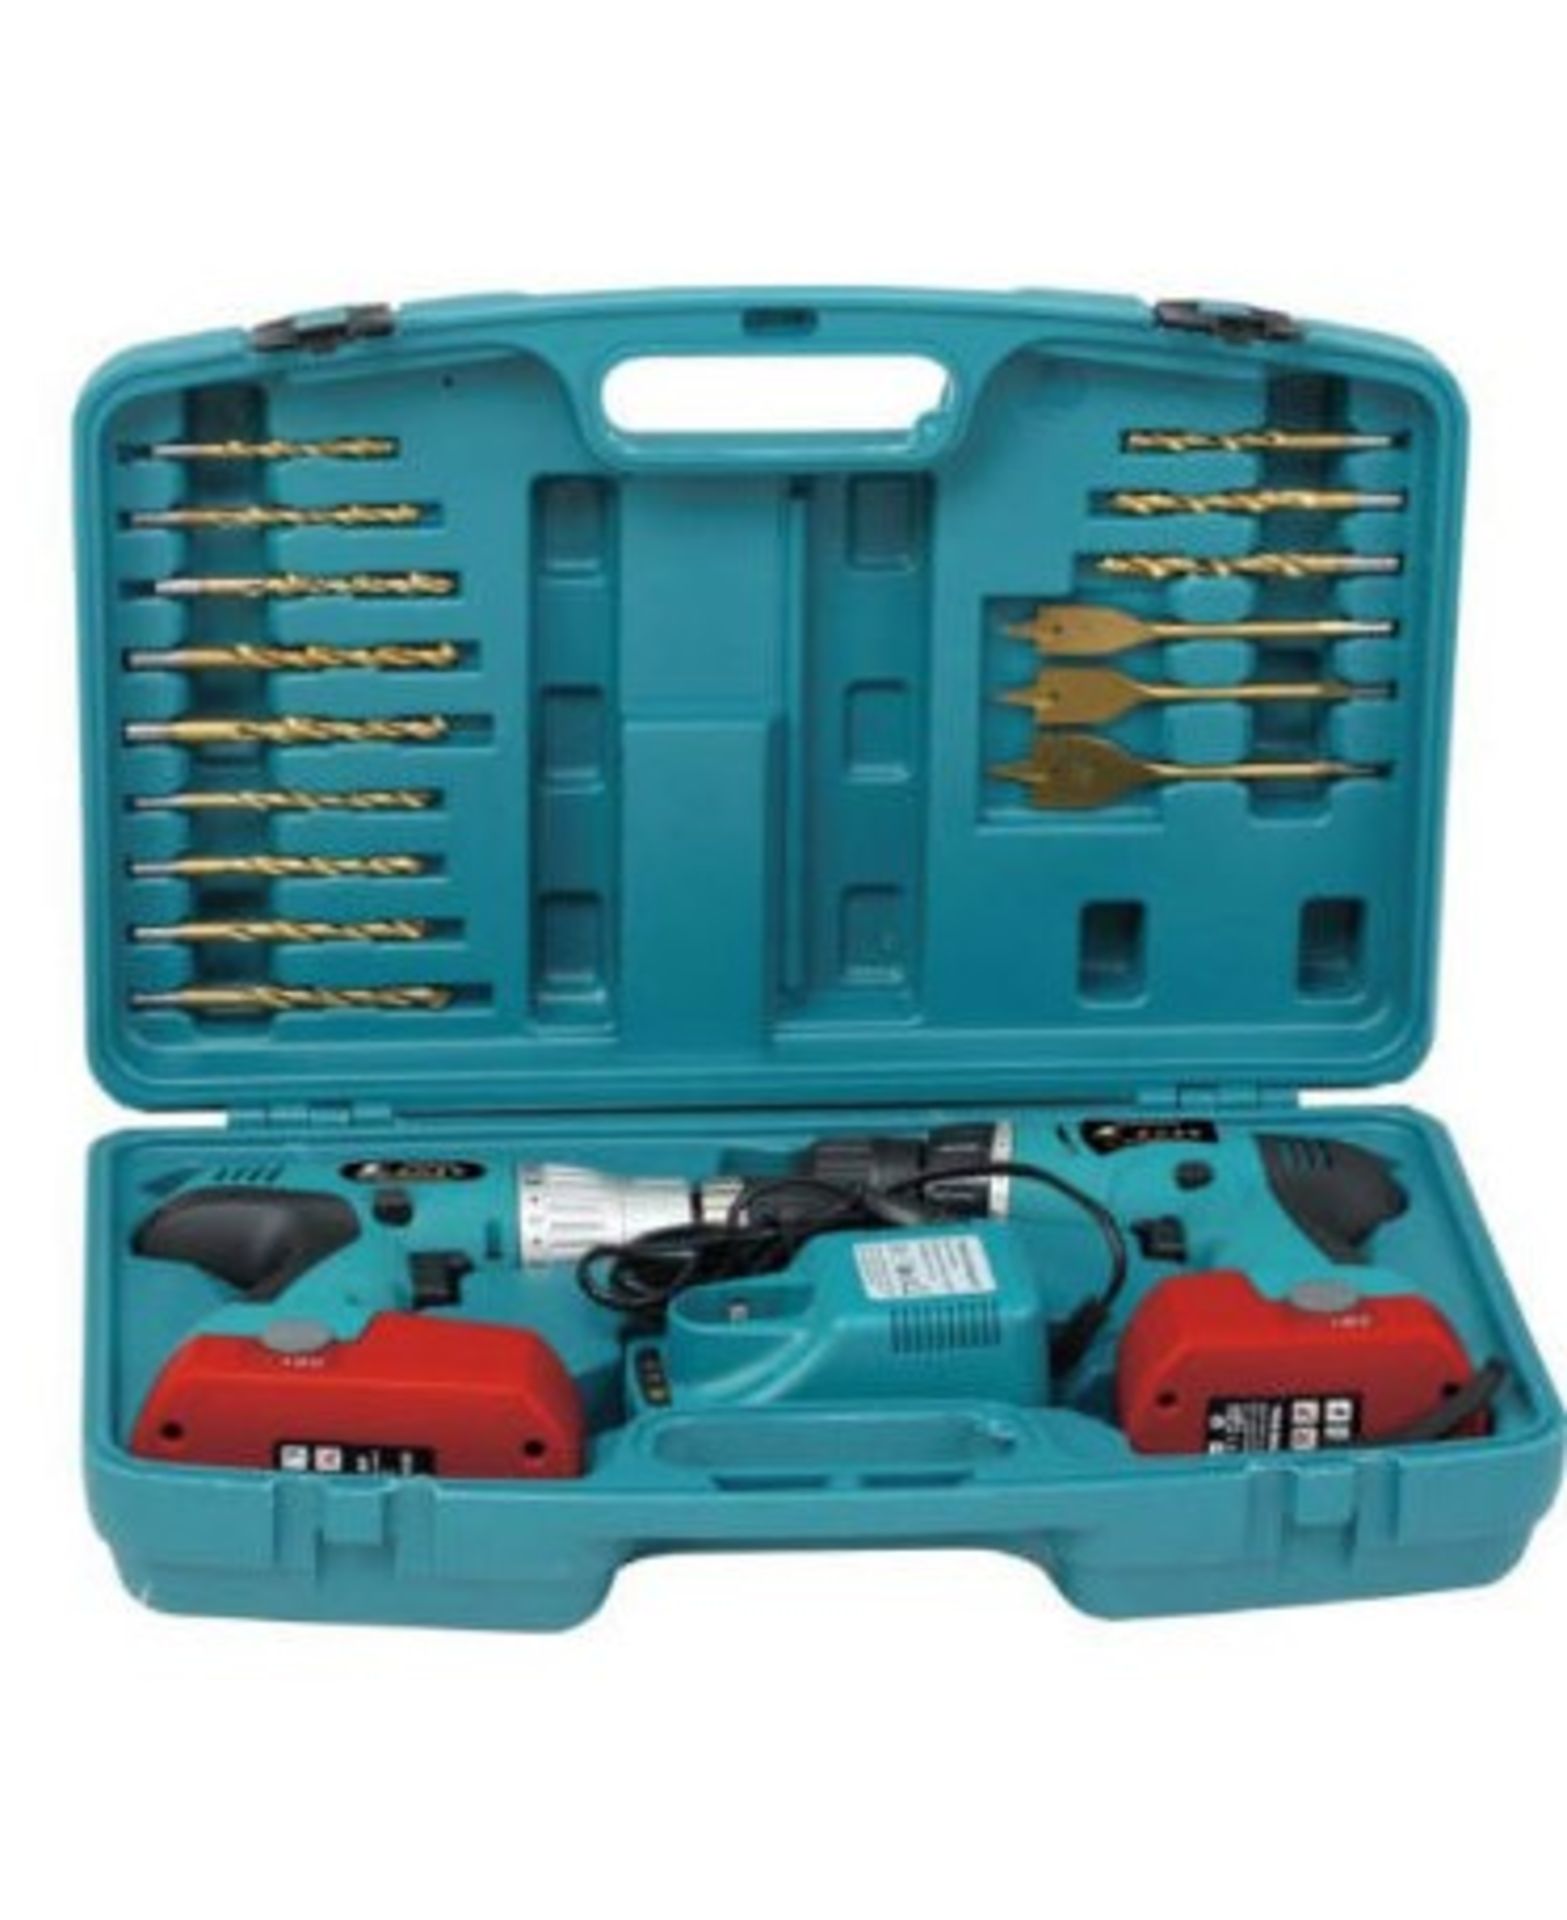 V *TRADE QTY* Brand New 18V Twin Drill Kit with Hammer Action and Torque Adjustment - with 15 - Image 2 of 2